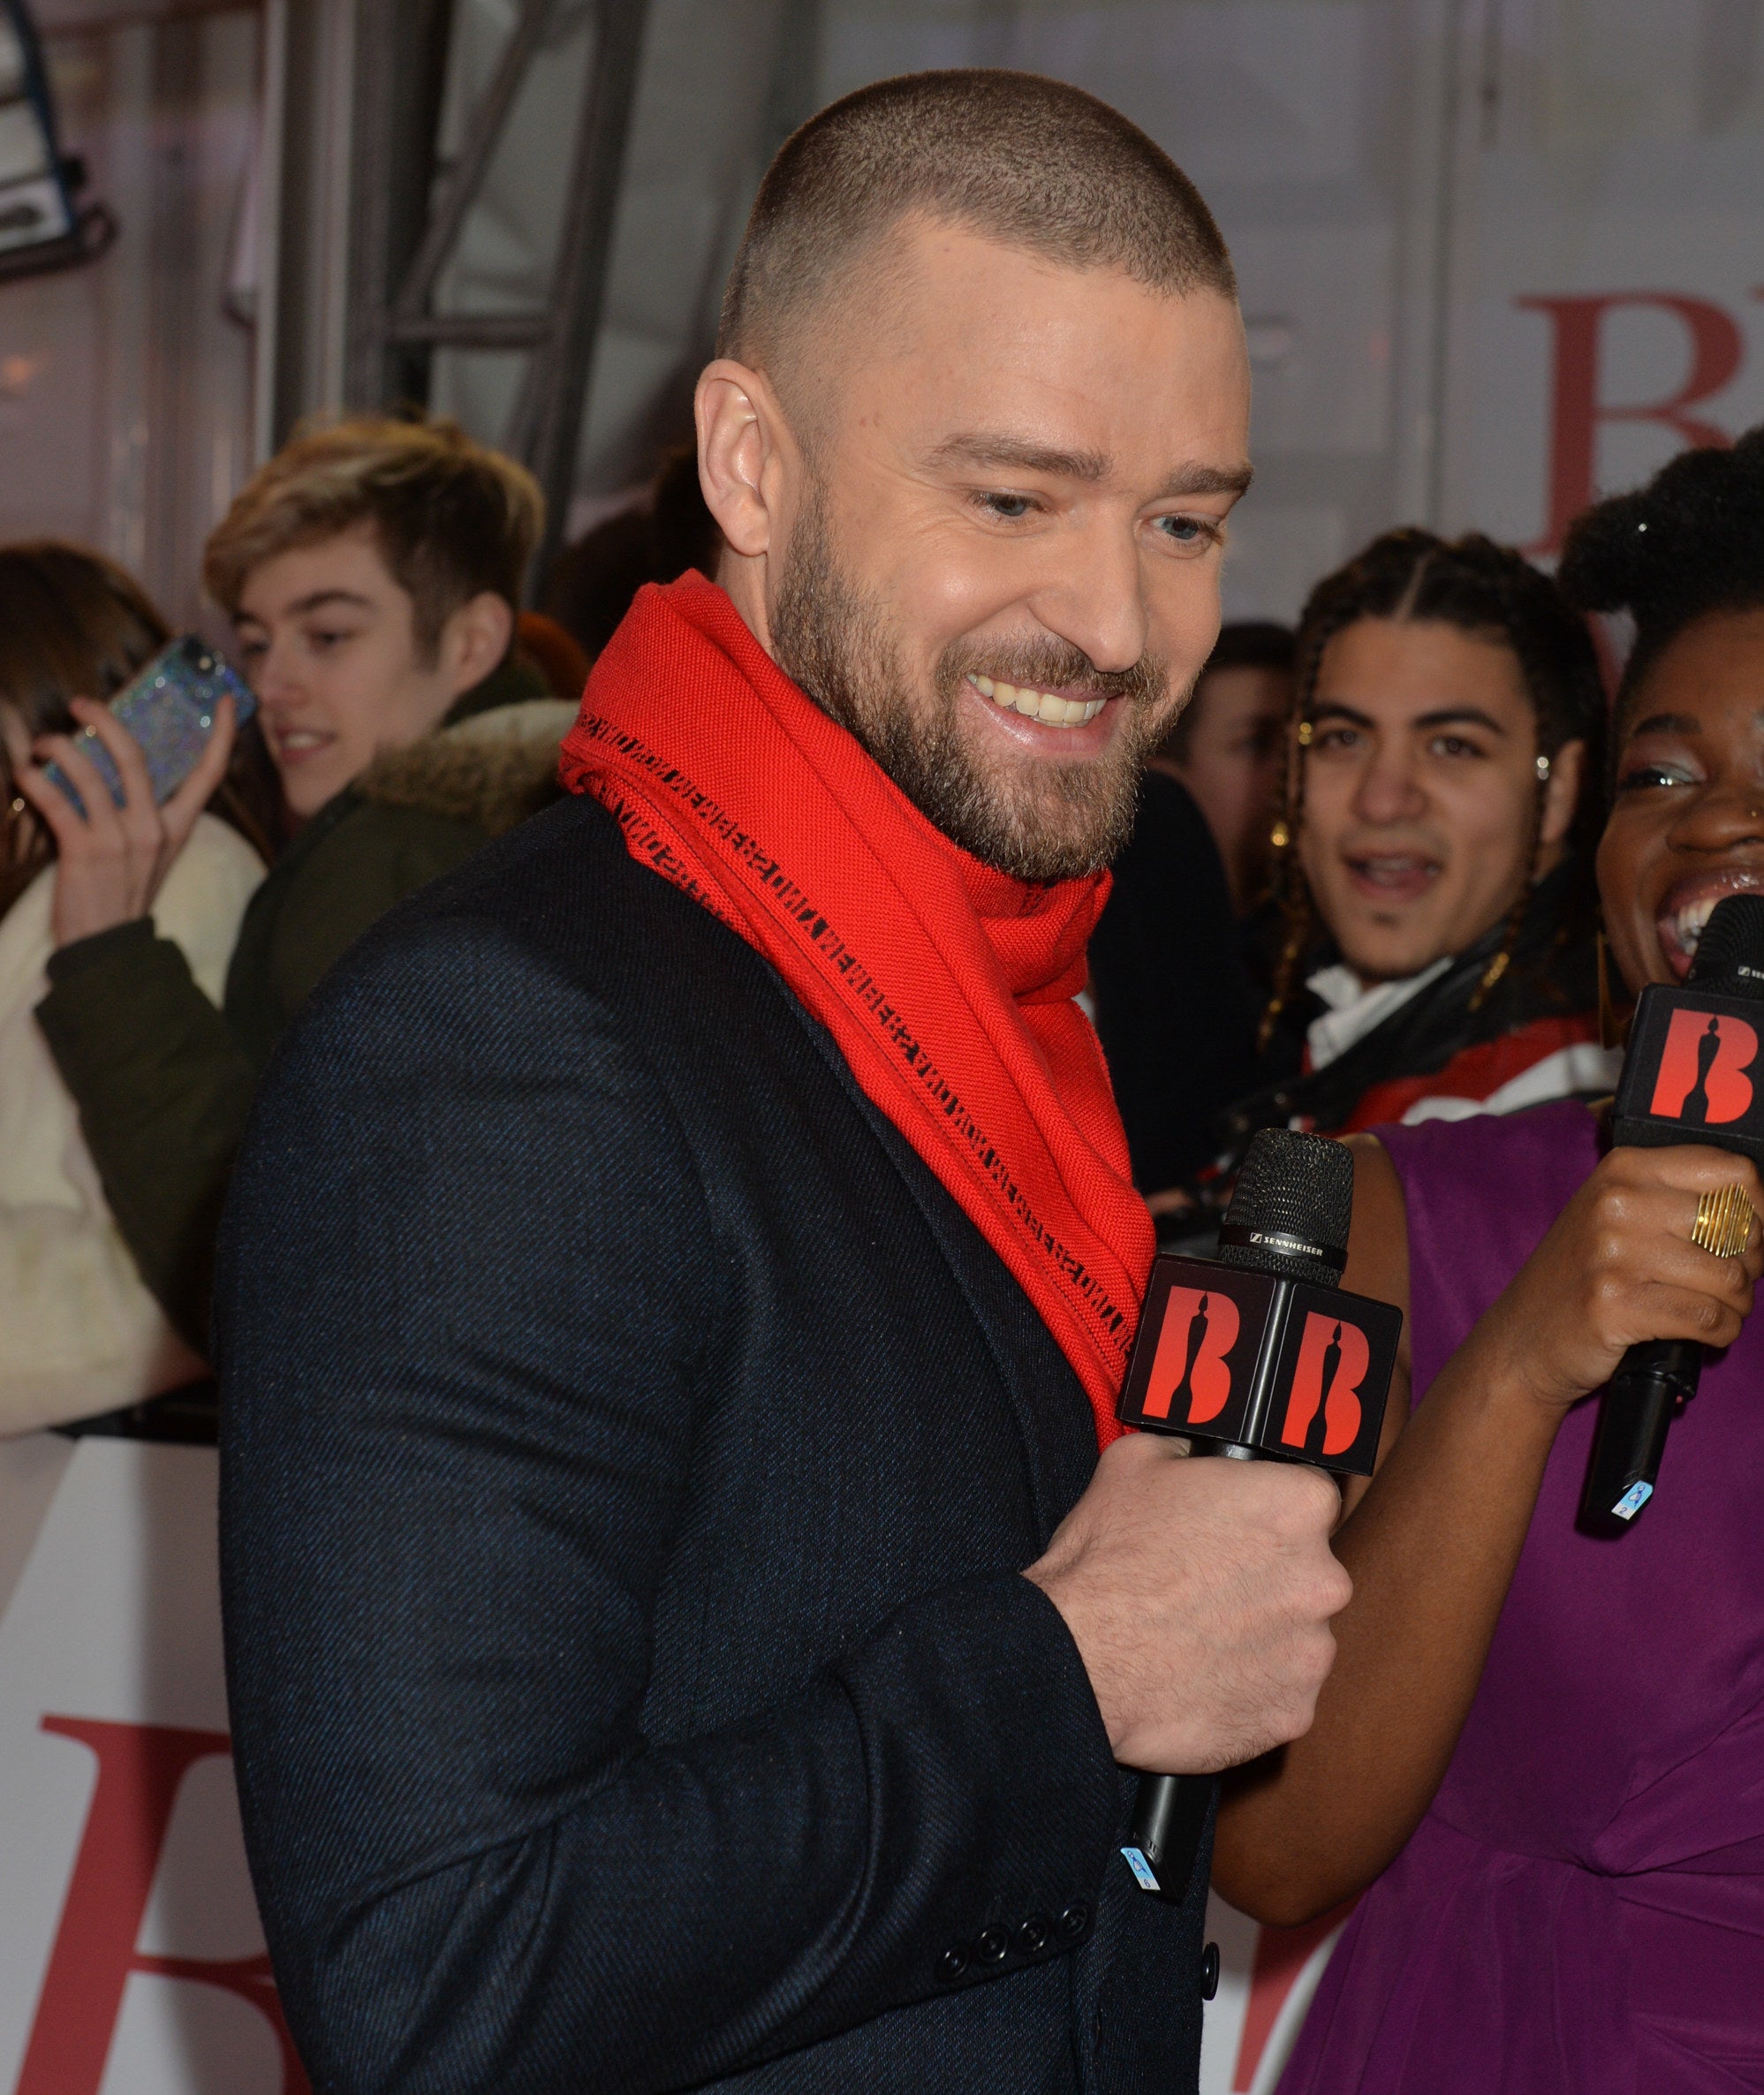 Justin Timberlake attends The BRIT Awards 2018 Red Carpet, The O2, London, UK, Wednesday 21 Feb 2018